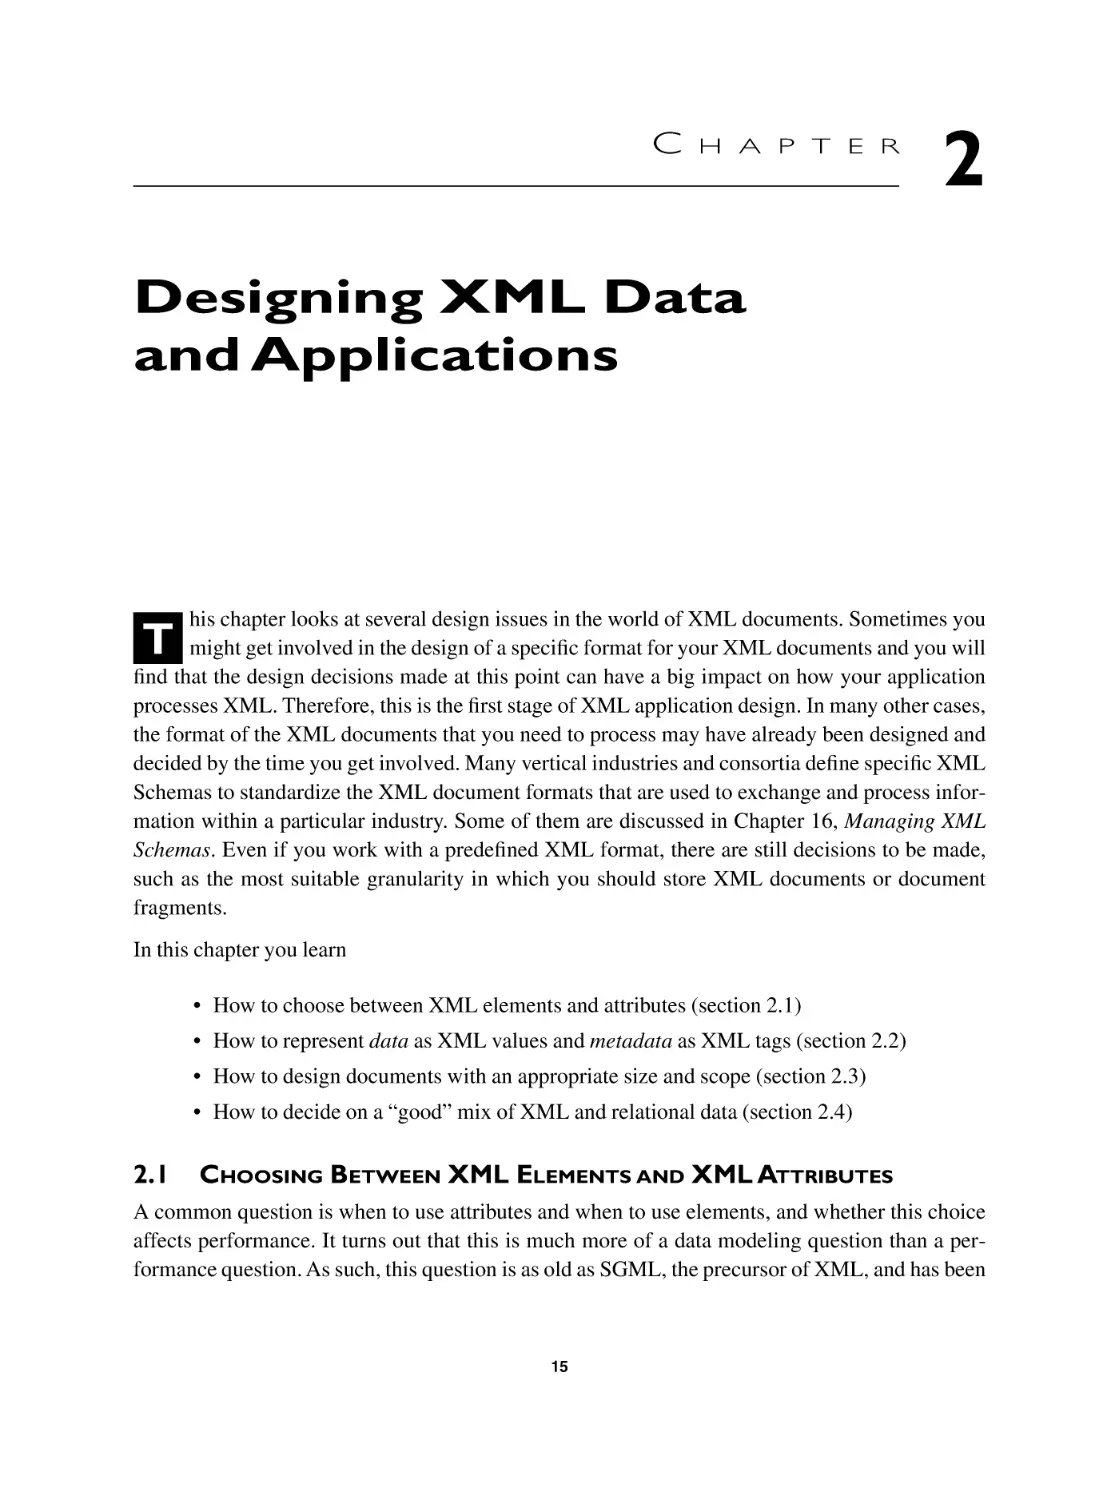 Chapter 2 Designing XML Data and Applications
2.1 Choosing Between XML Elements and XML Attributes